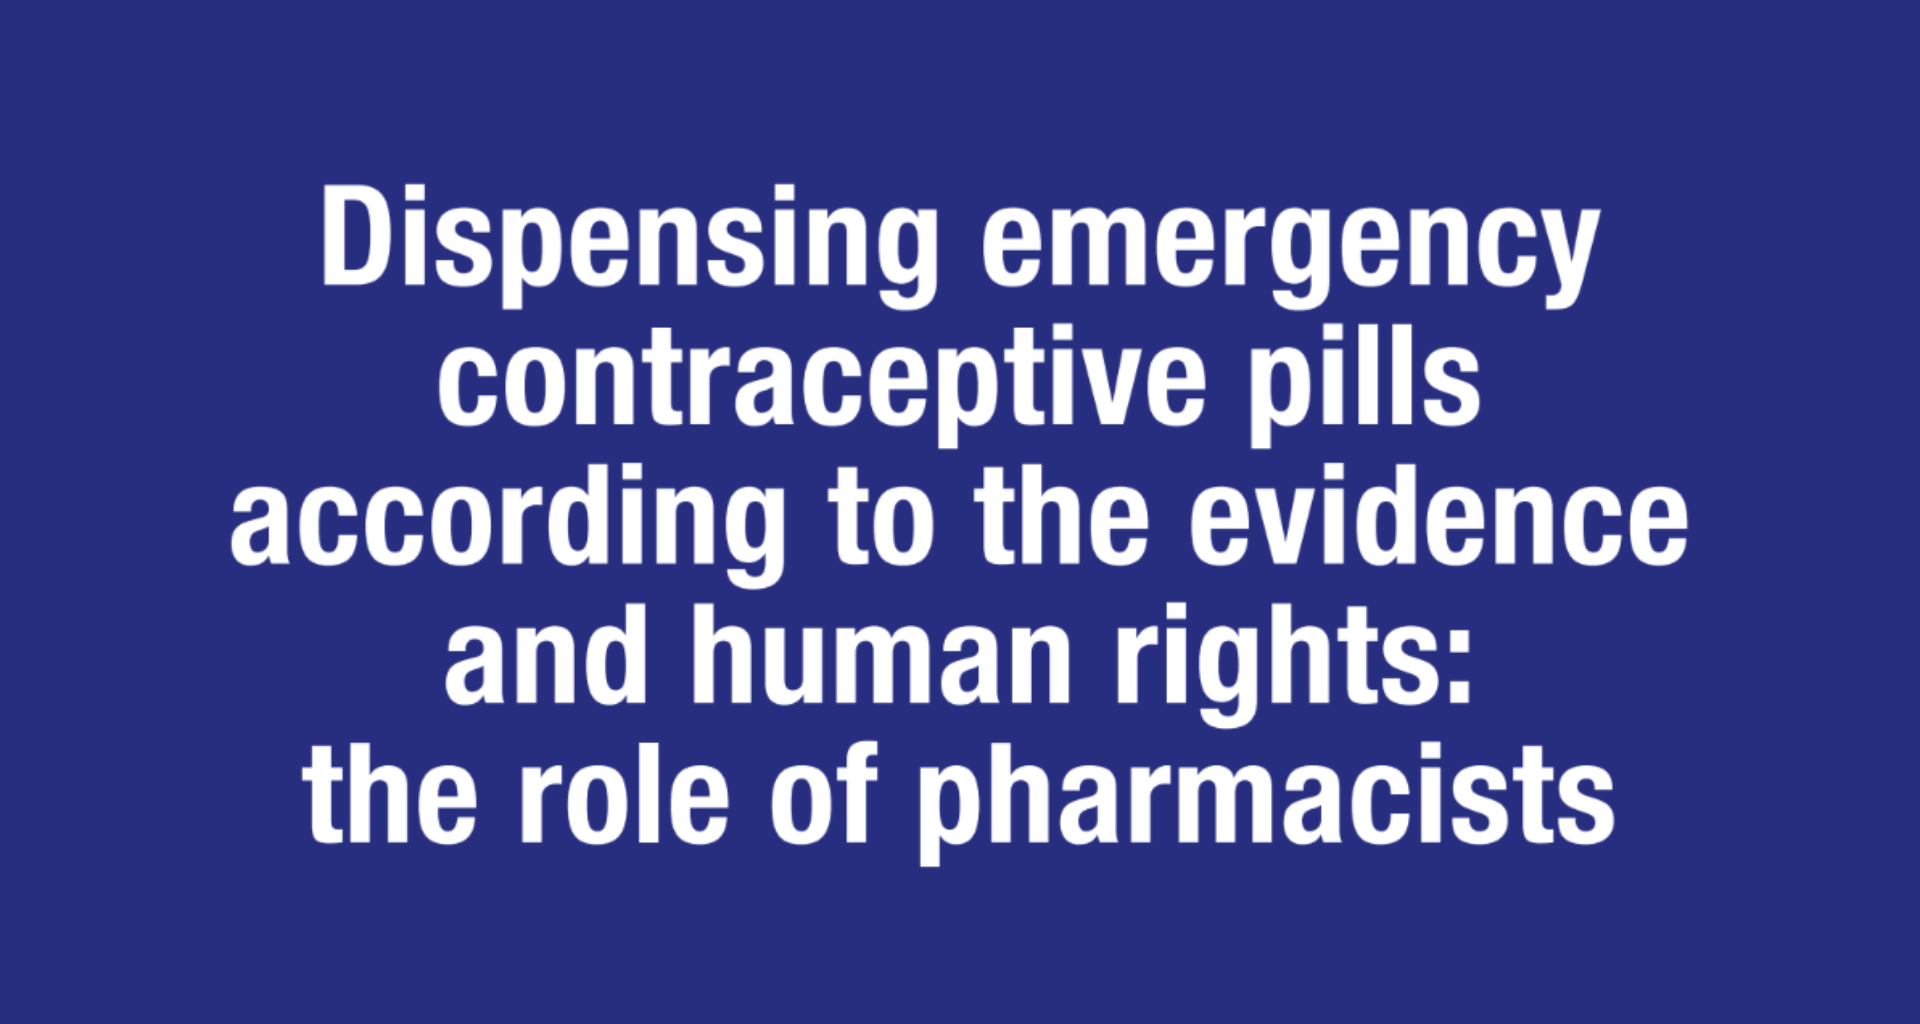 Dispensing emergency contraceptive pills according to the evidence and human rights: the role of pharmacists